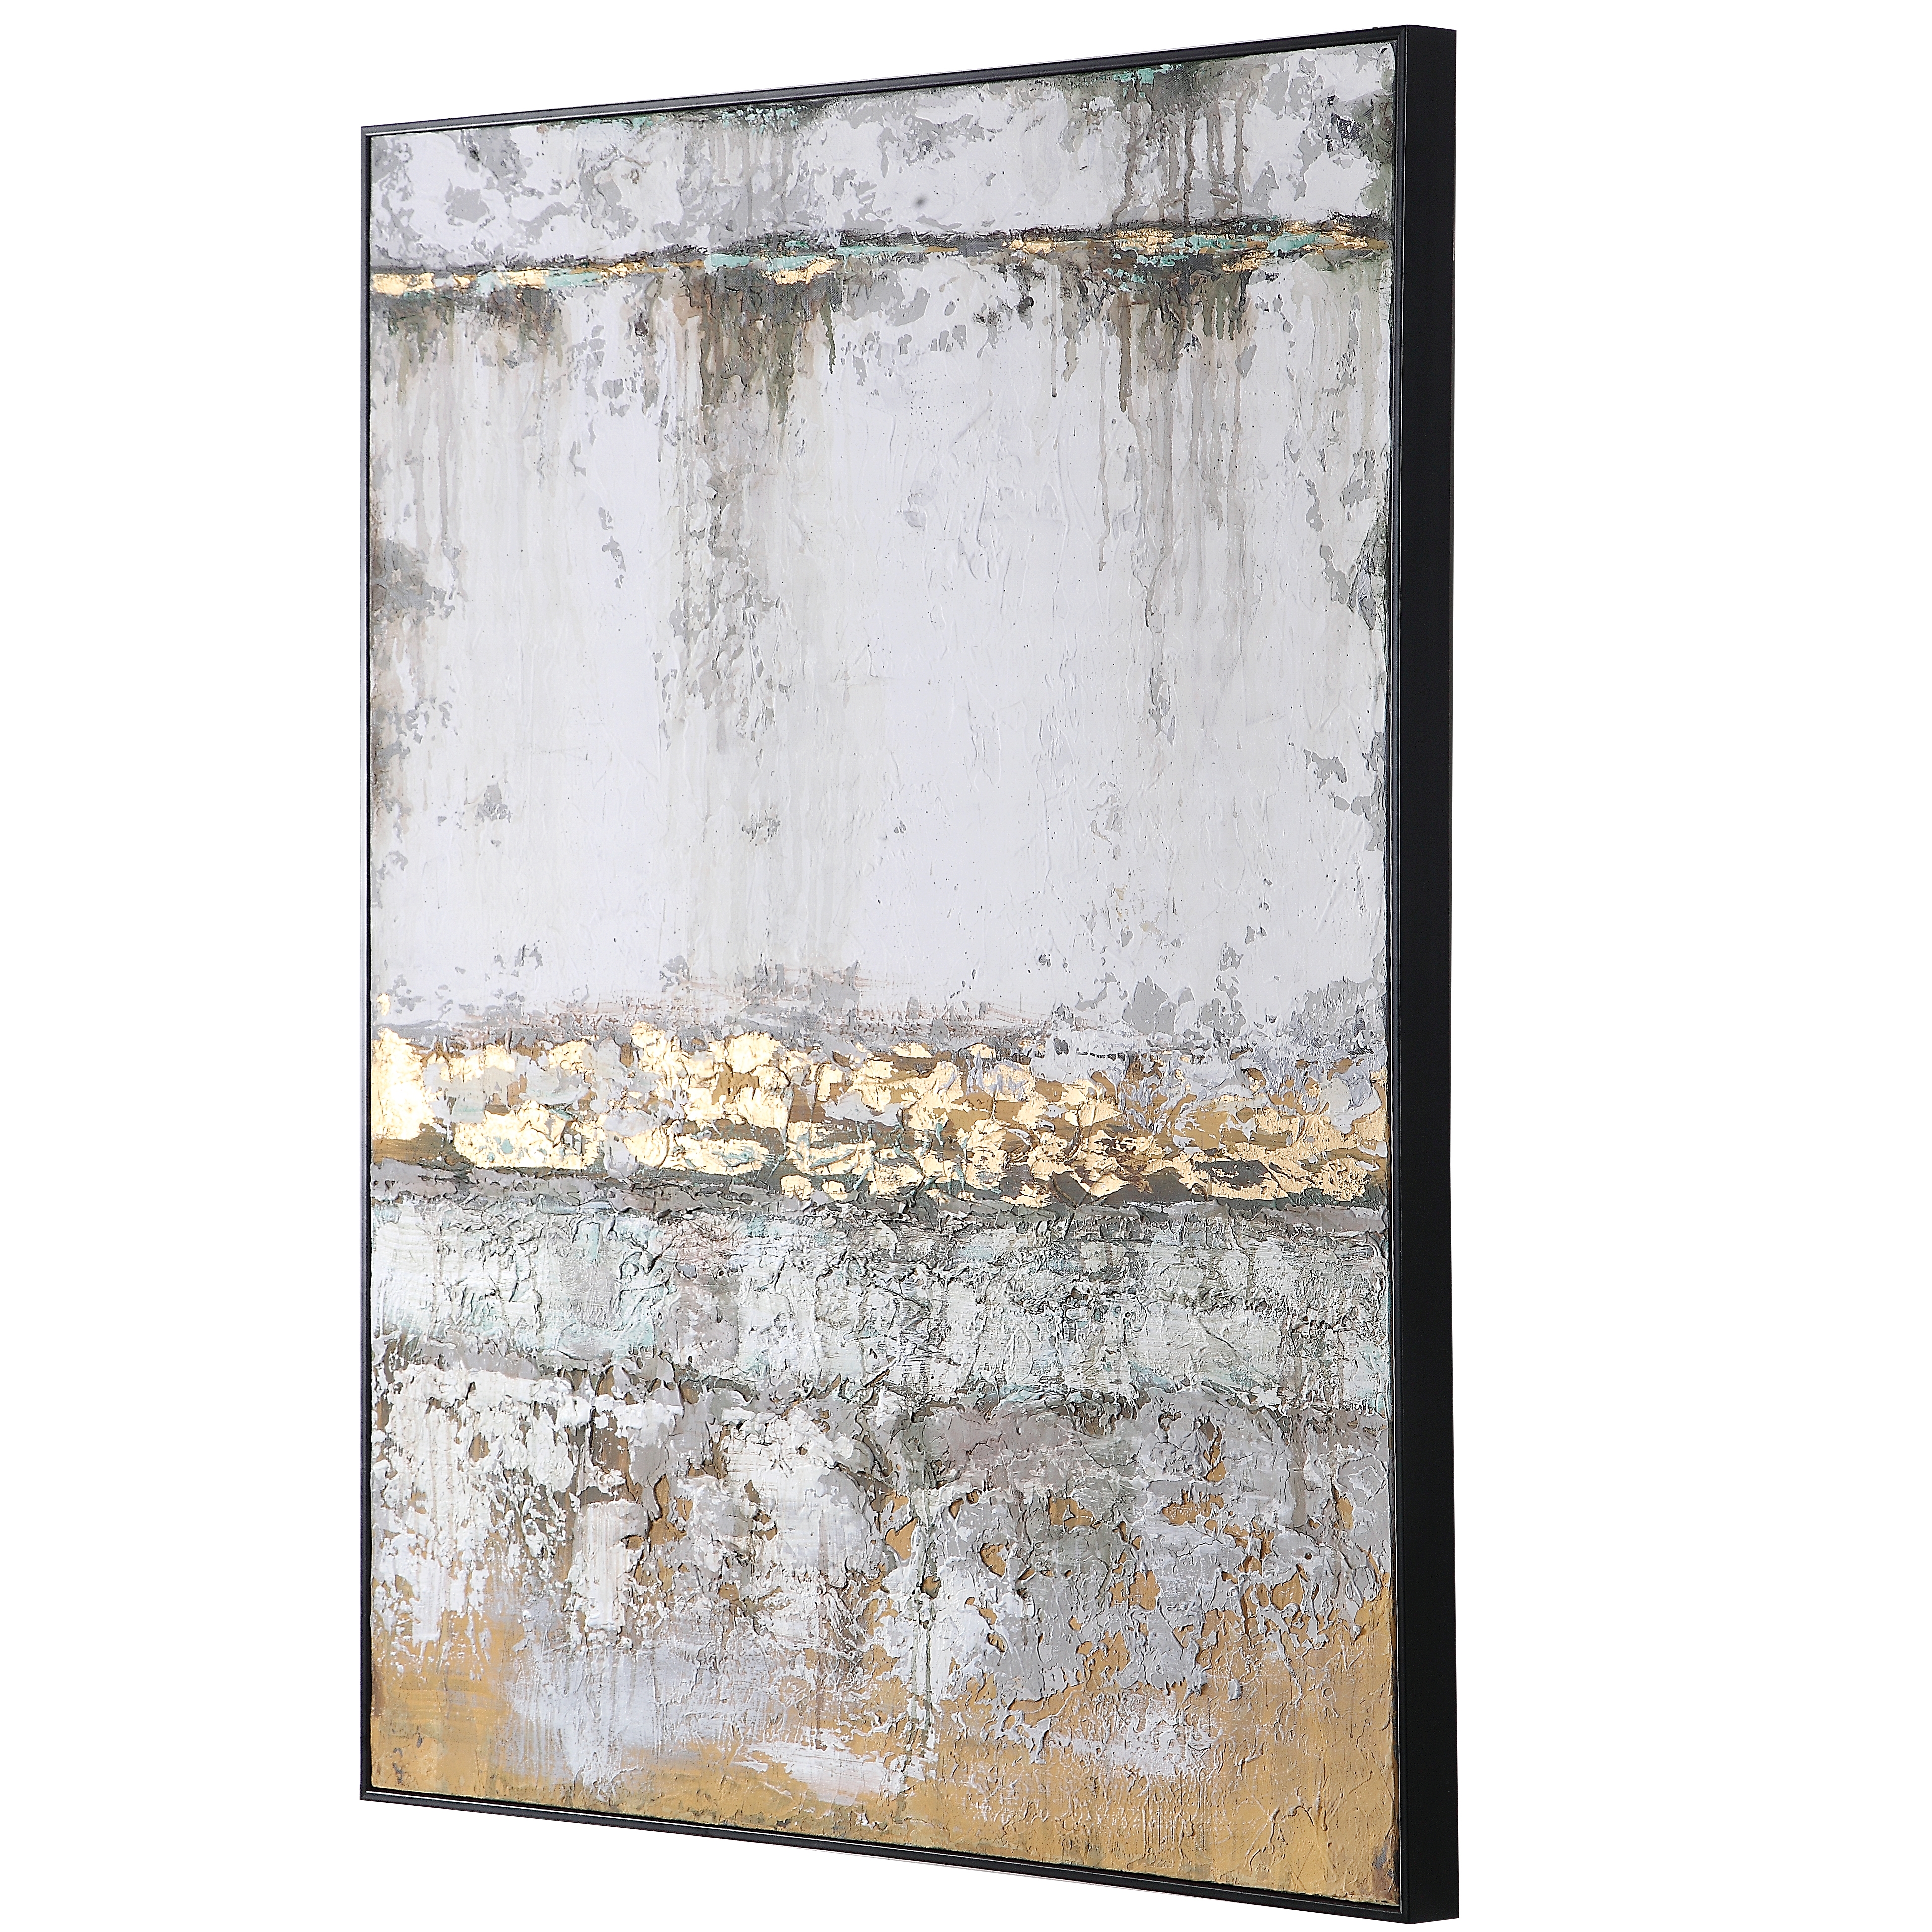 The Wall Abstract Art, 36" x 47.75" - DISCONTINUED - Image 5